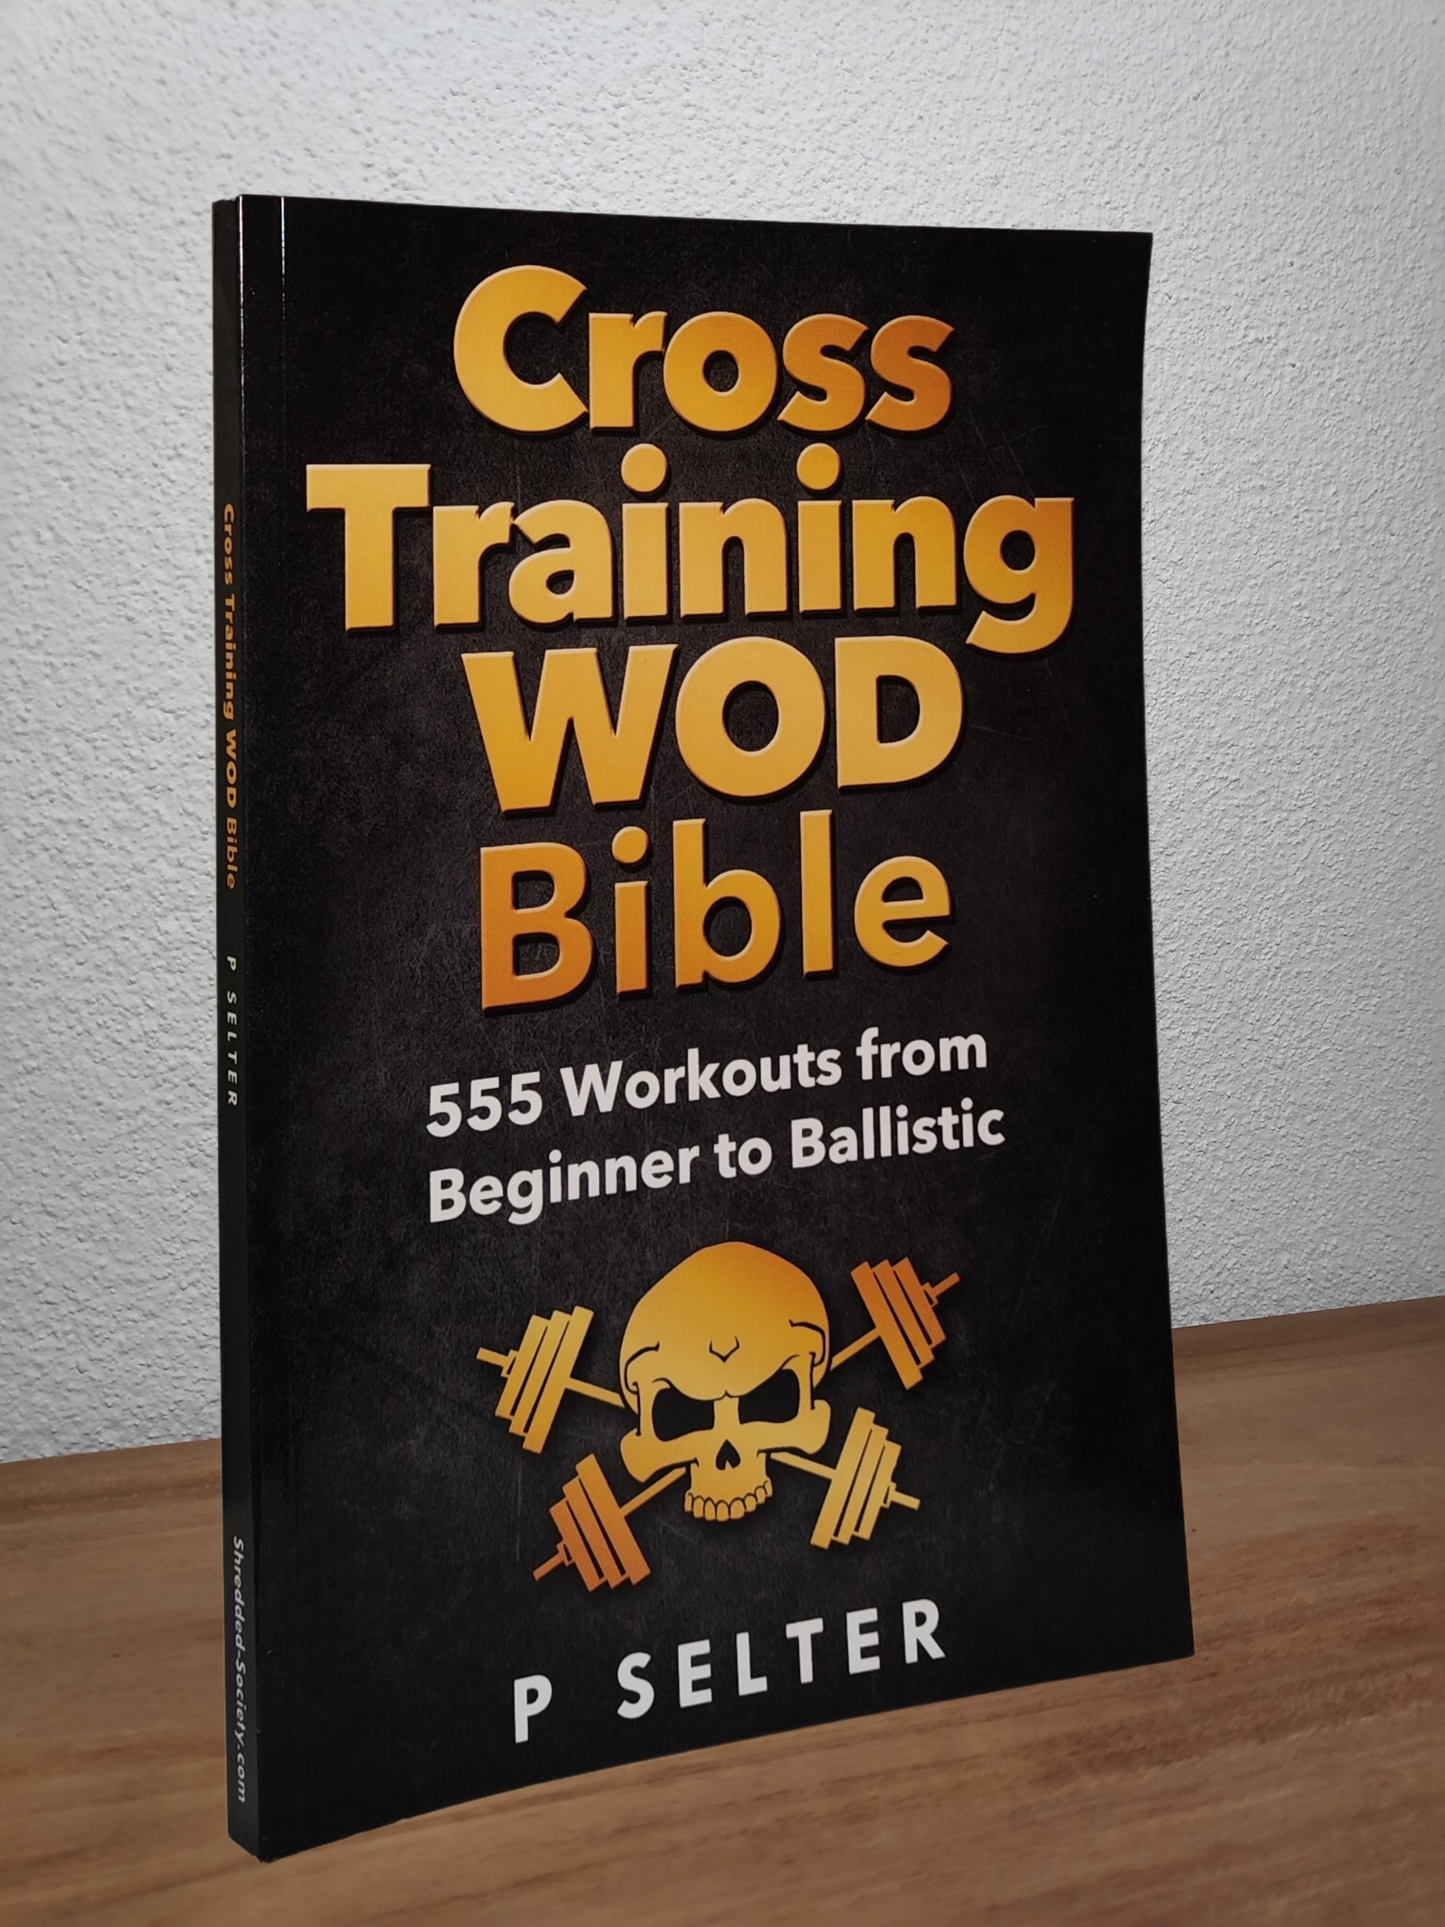 Paige Selter - Cross Training WOD Bible - Second-hand english book to deliver in Zurich & Switzerland